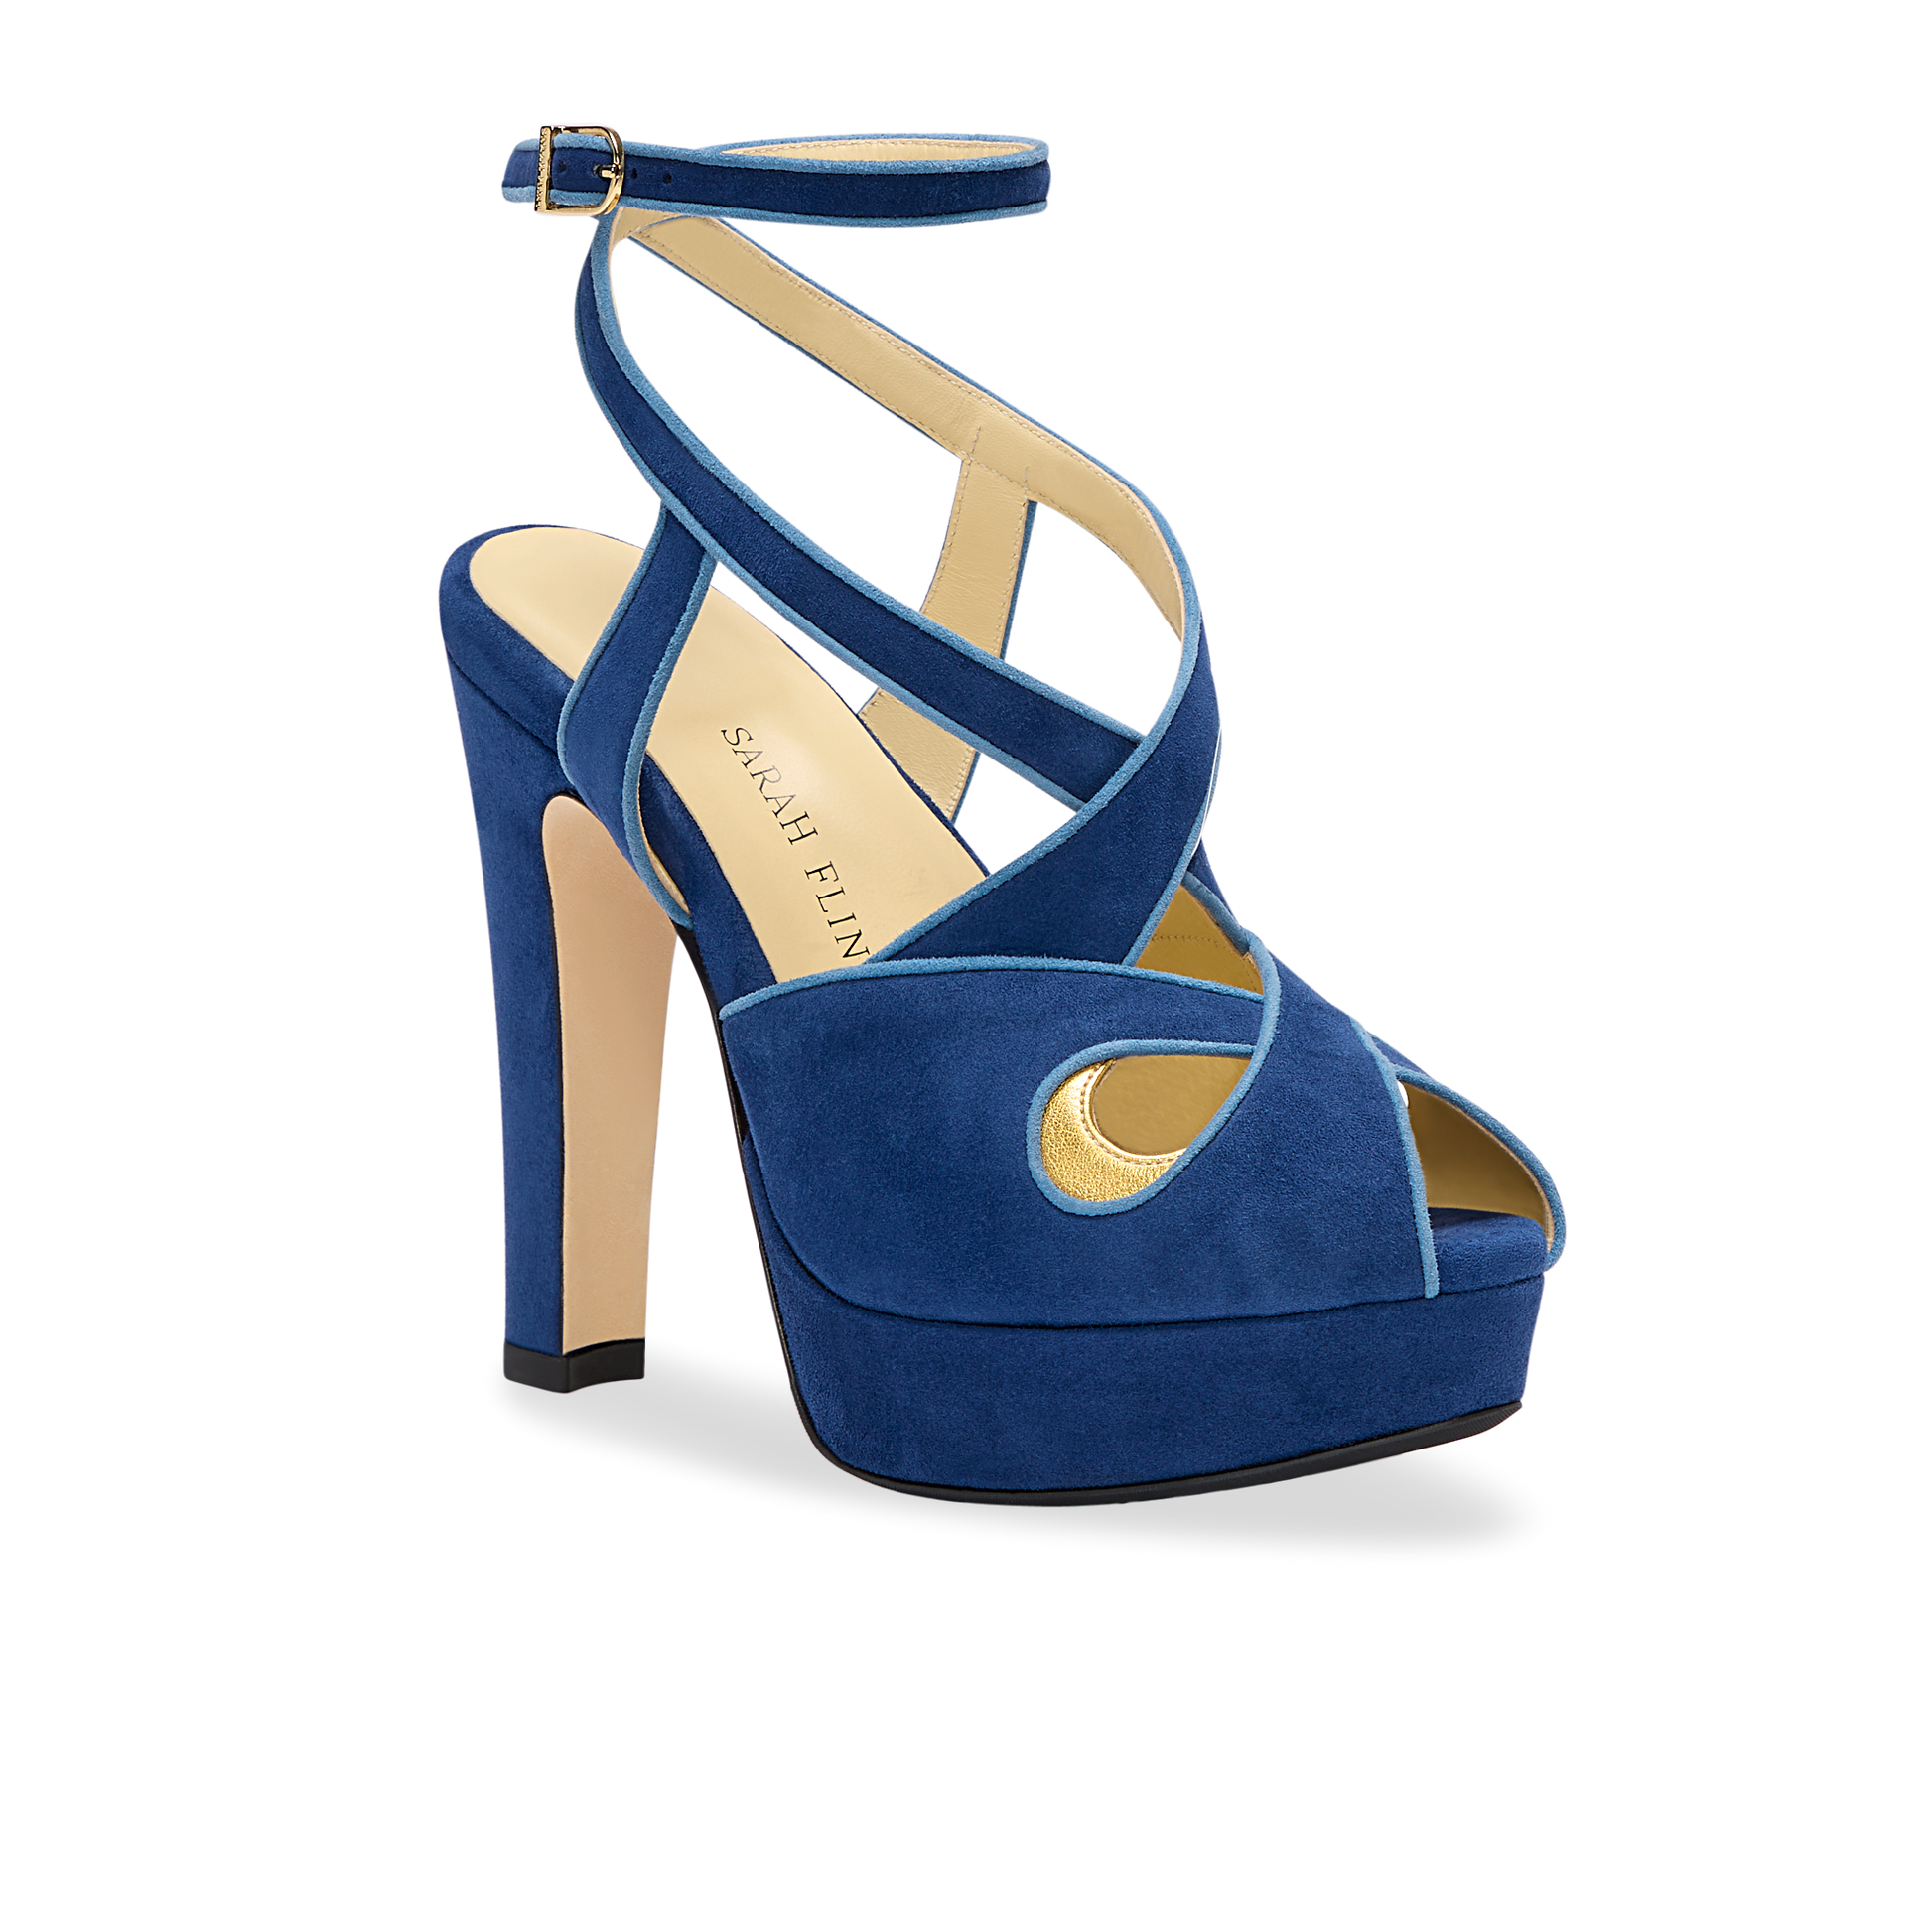 Perfect Sharon 120 in Royal Navy Suede